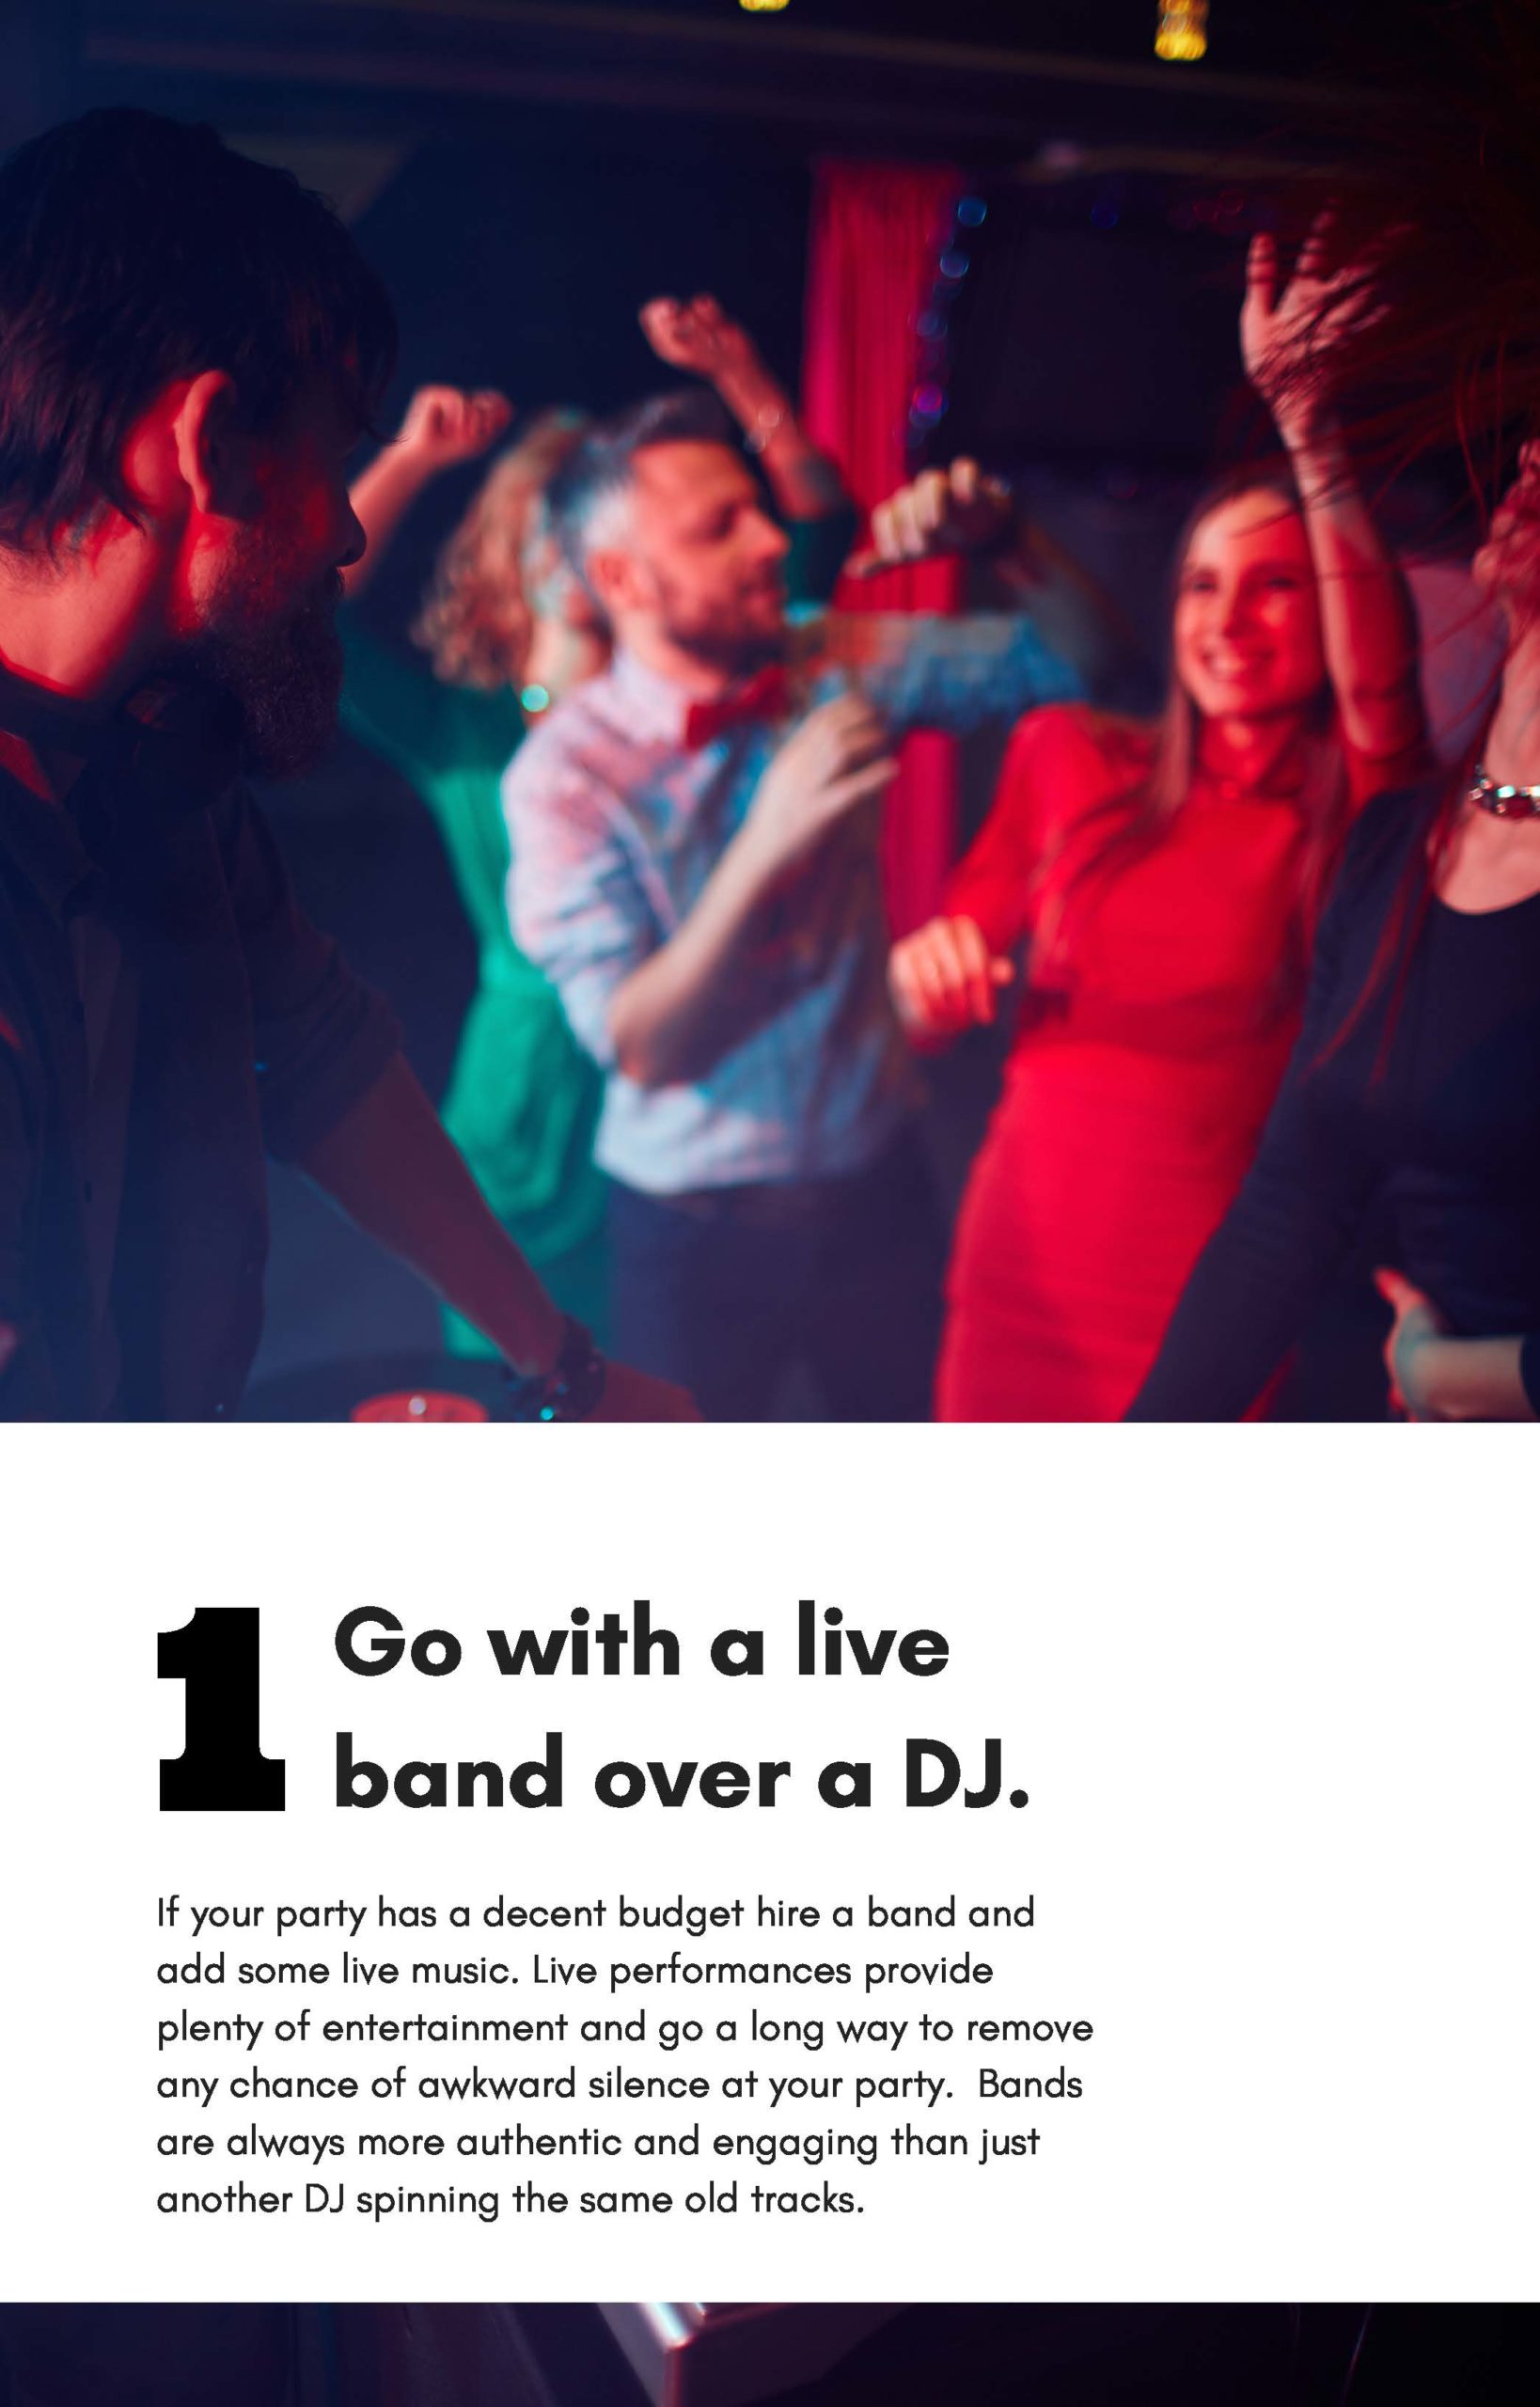 Go With a Live band over a DJ